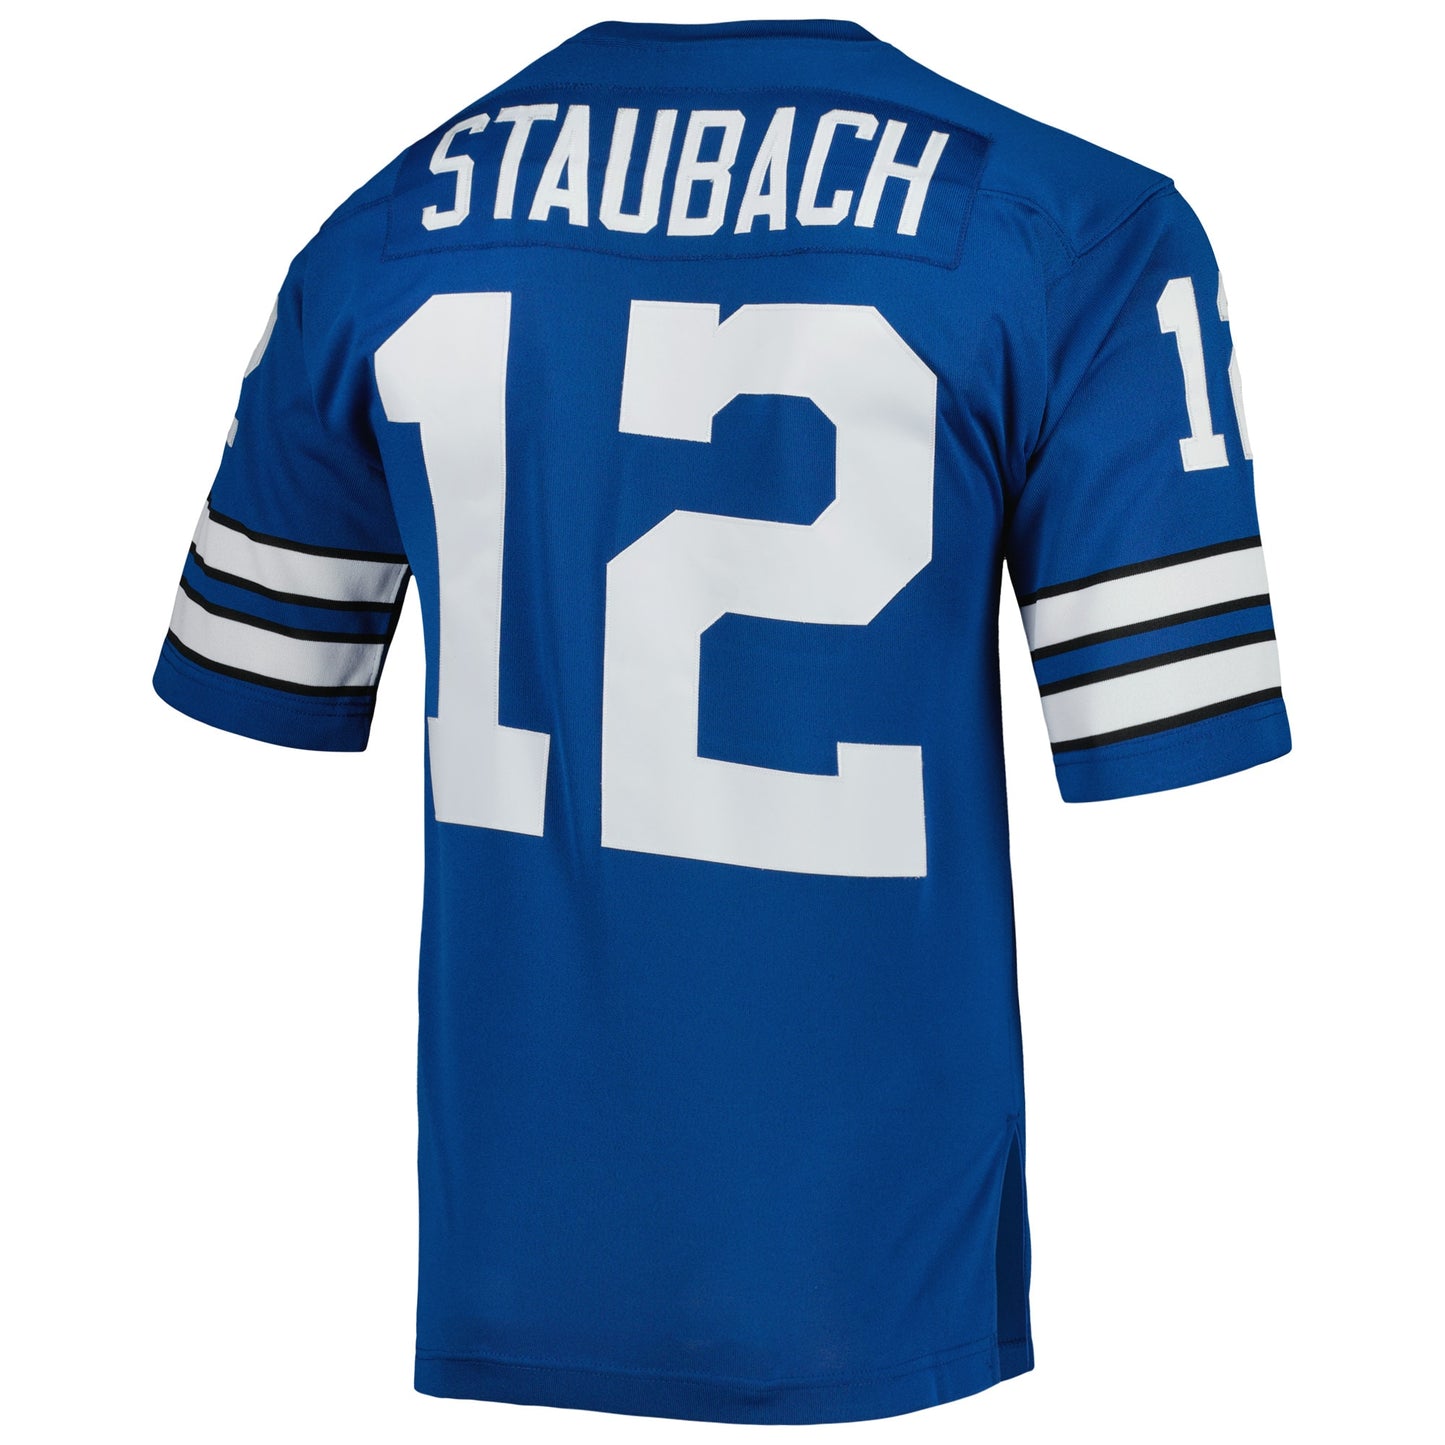 Roger Staubach Dallas Cowboys Mitchell & Ness 1971 Authentic Retired Player Jersey - Royal